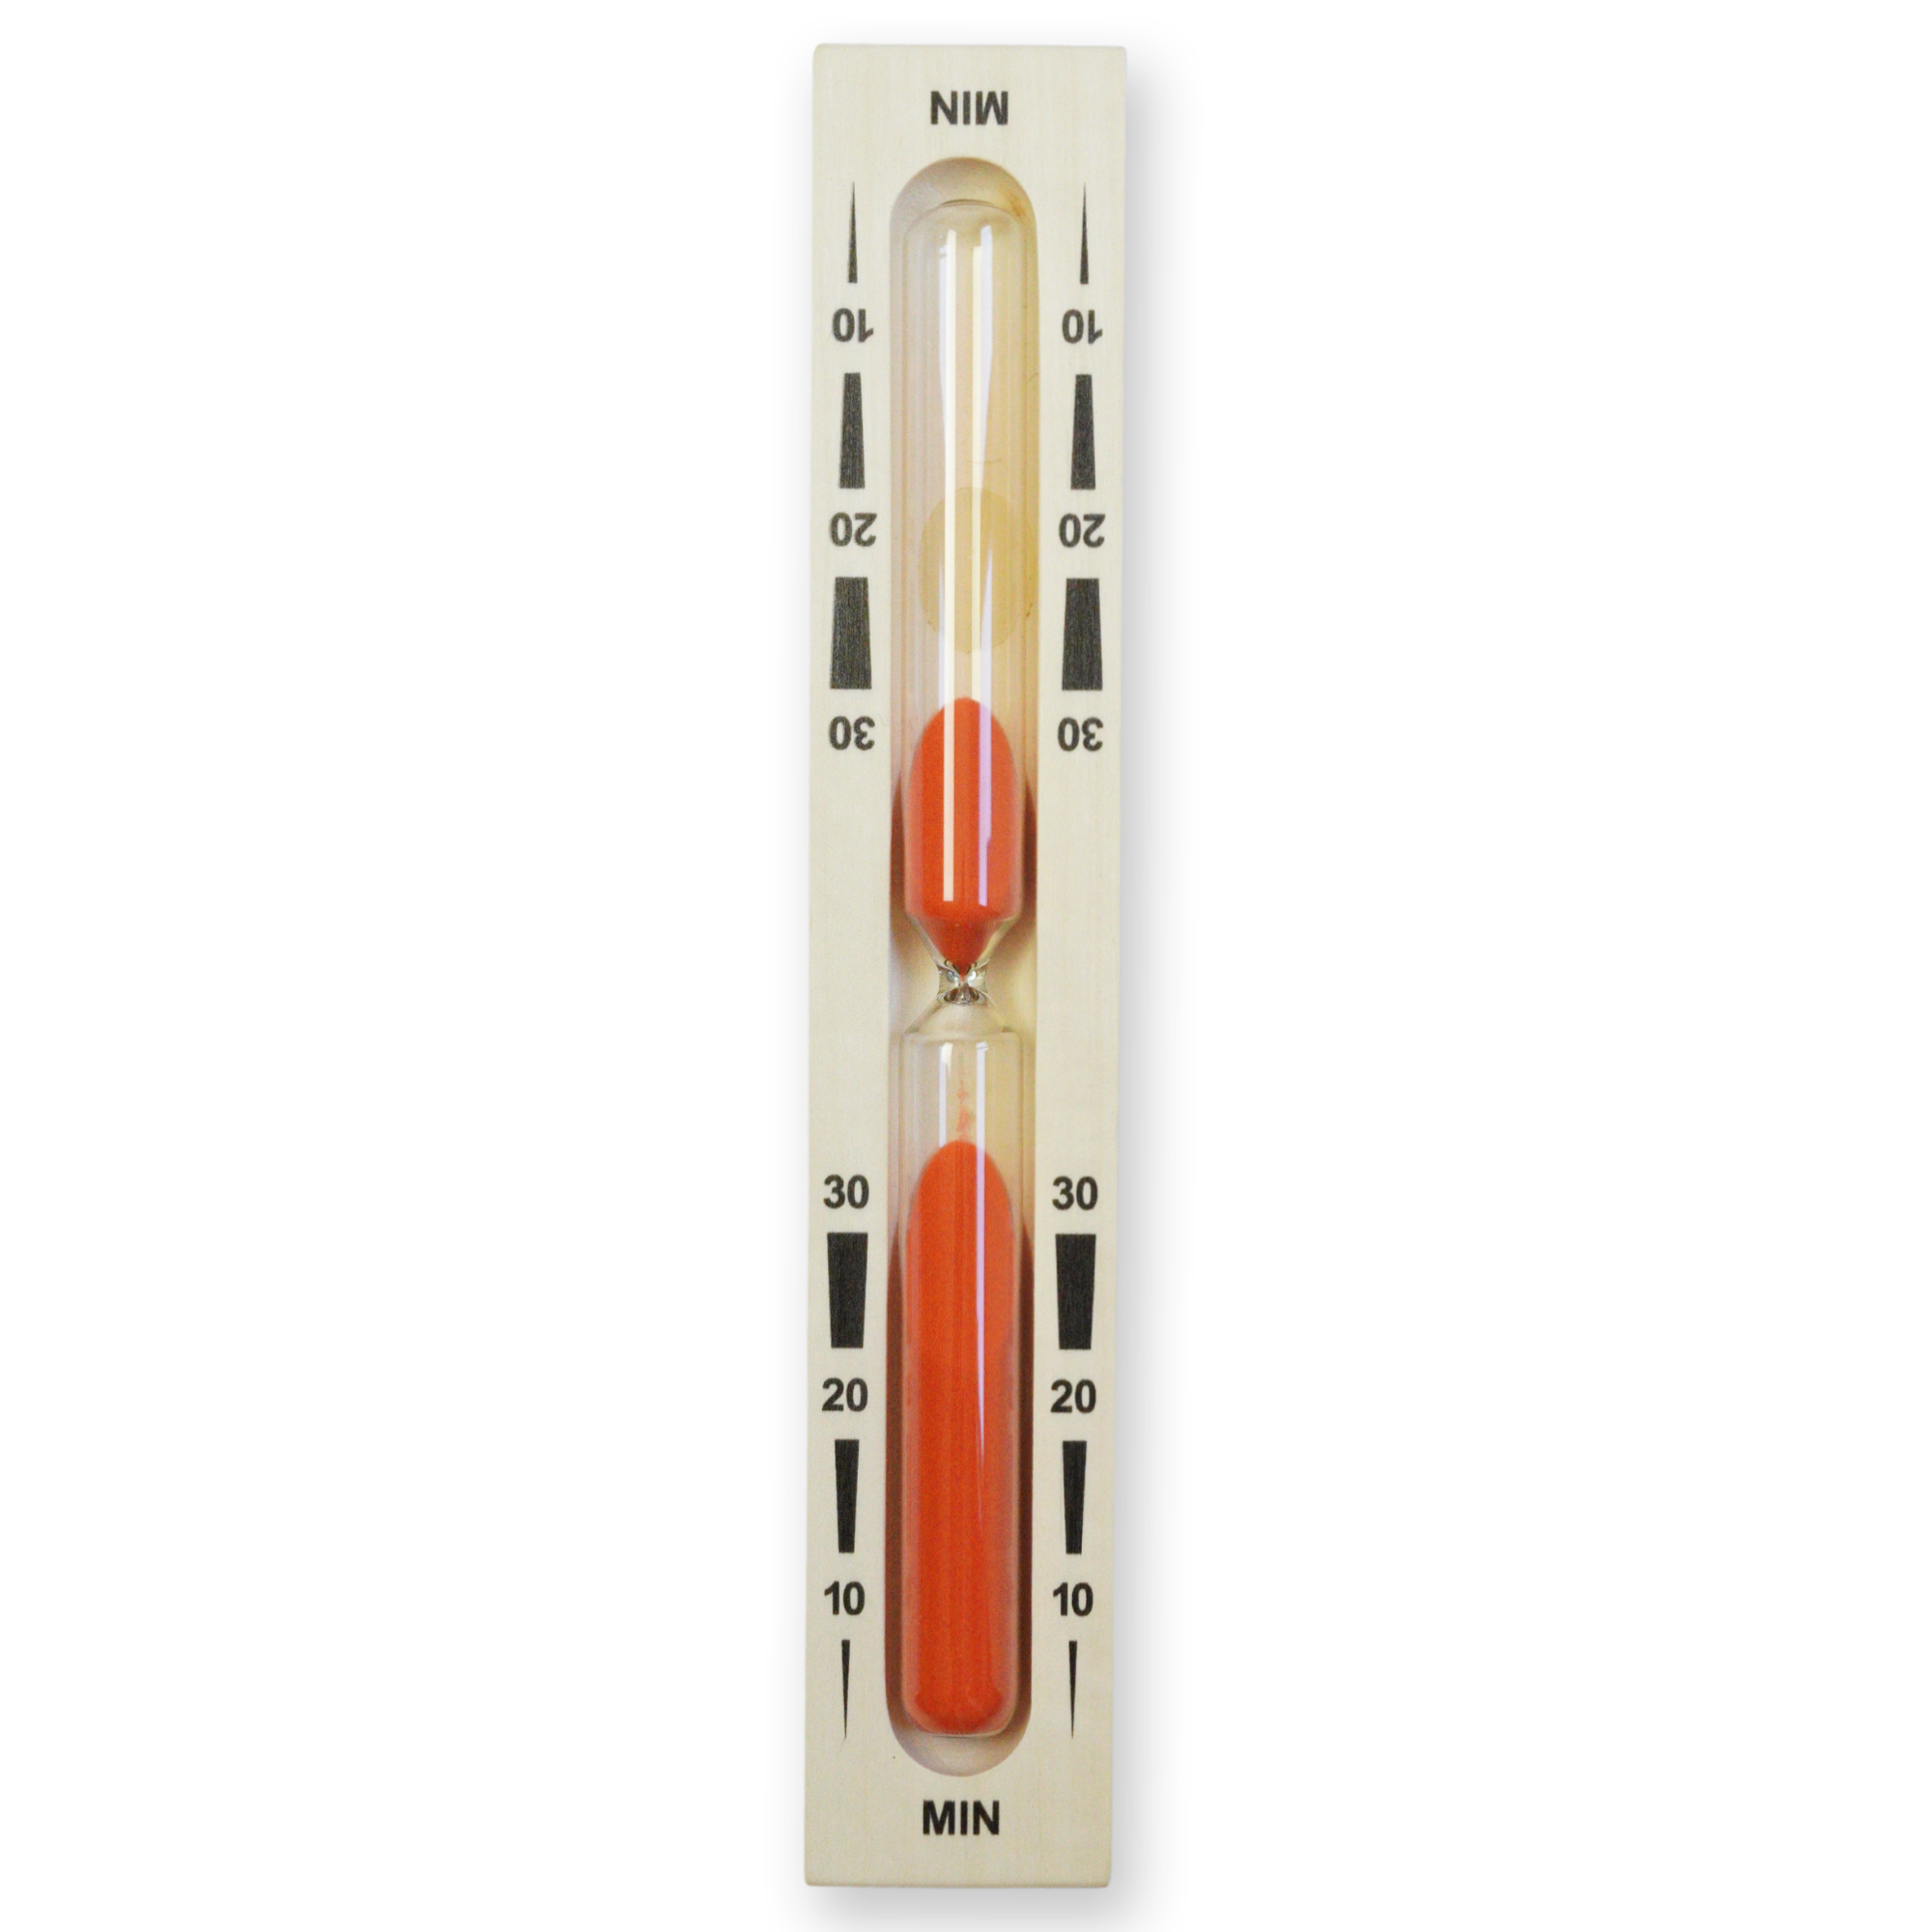 Sauna Thermometer - Liquid – Touch of Finland